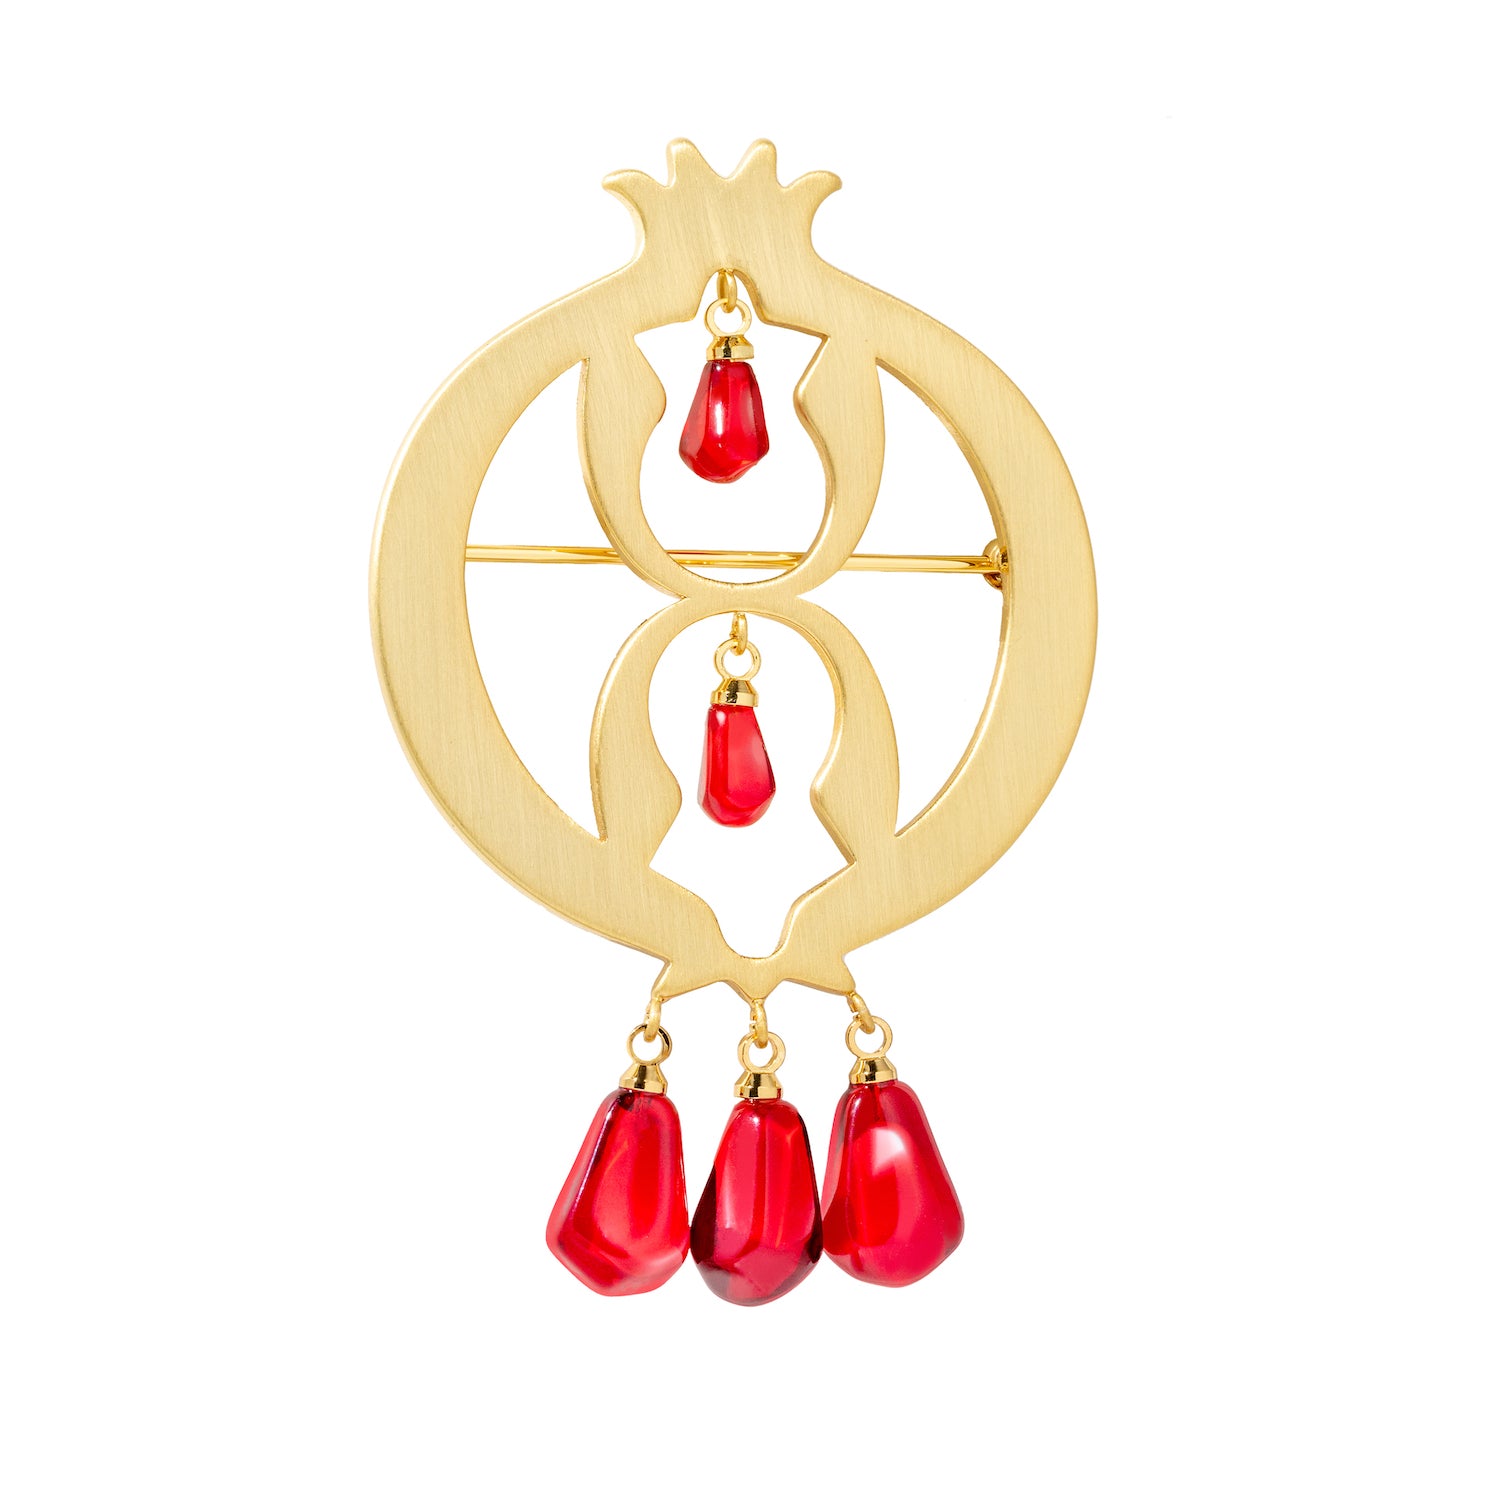 Pomegranate Brooch with seeds - Lusanet Collective